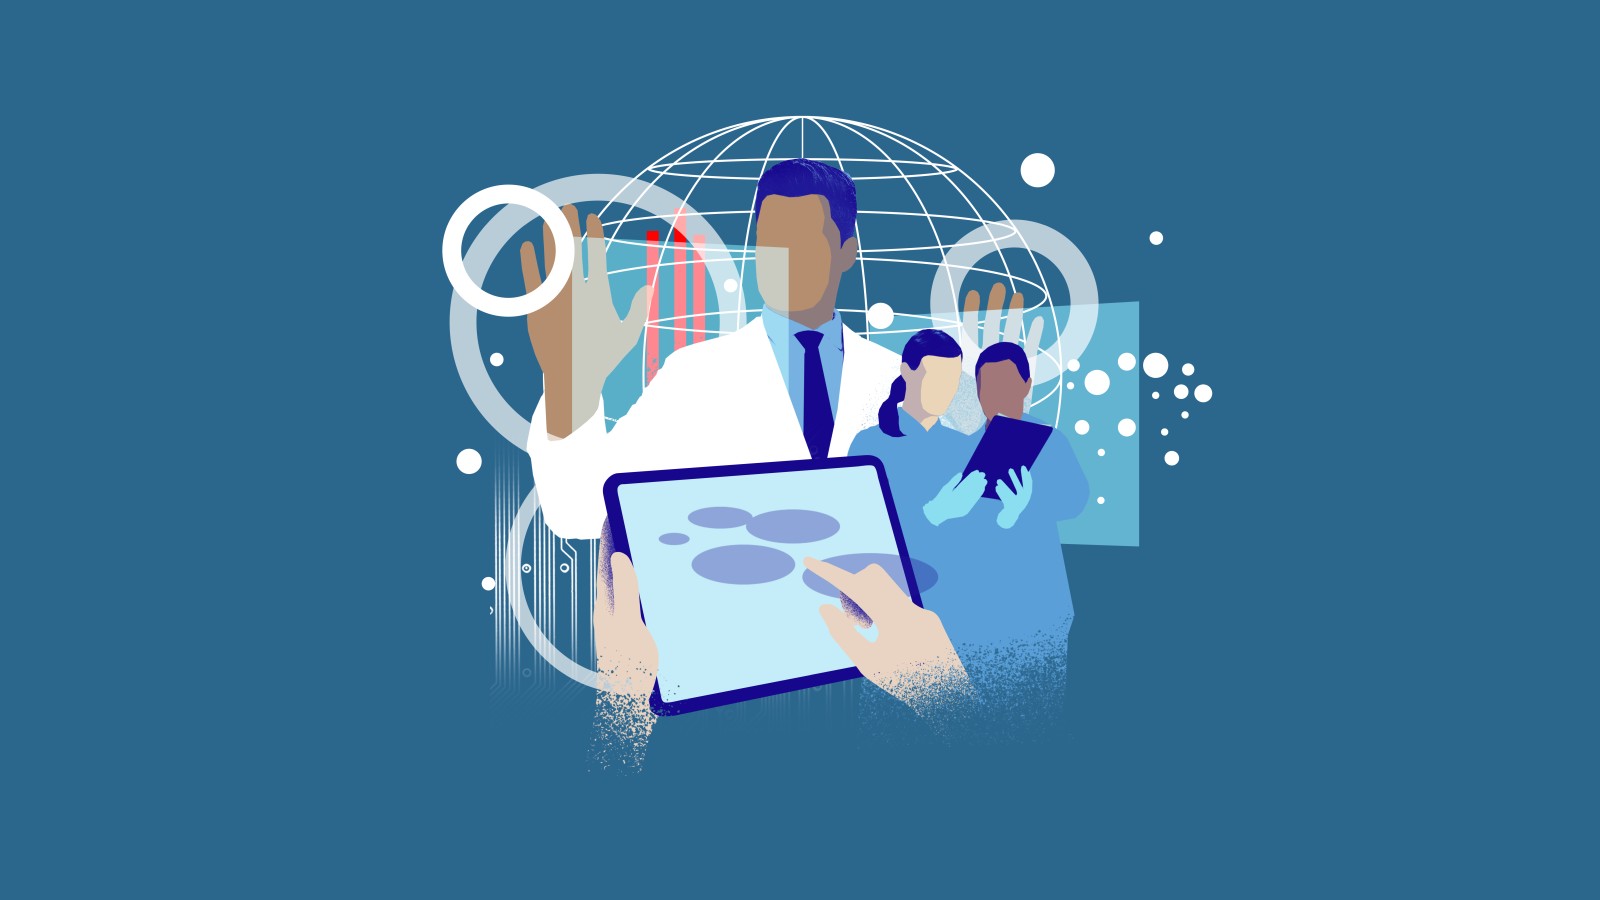 On a blue background, a stylized graphic of a doctor.